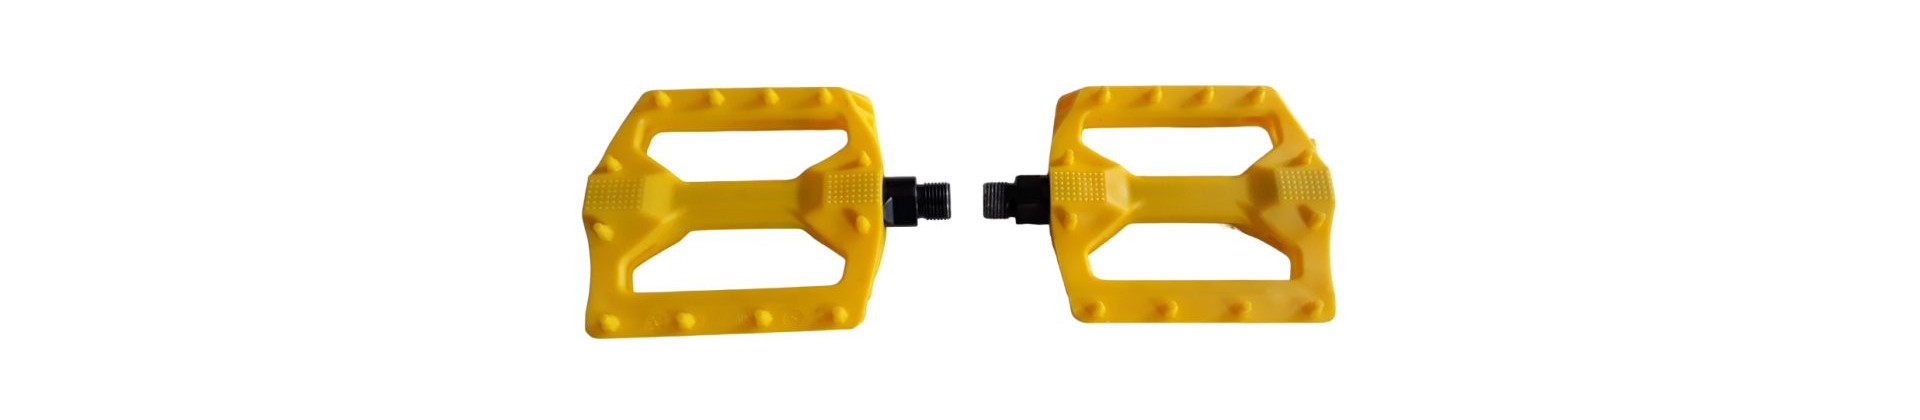 Fixie pedals